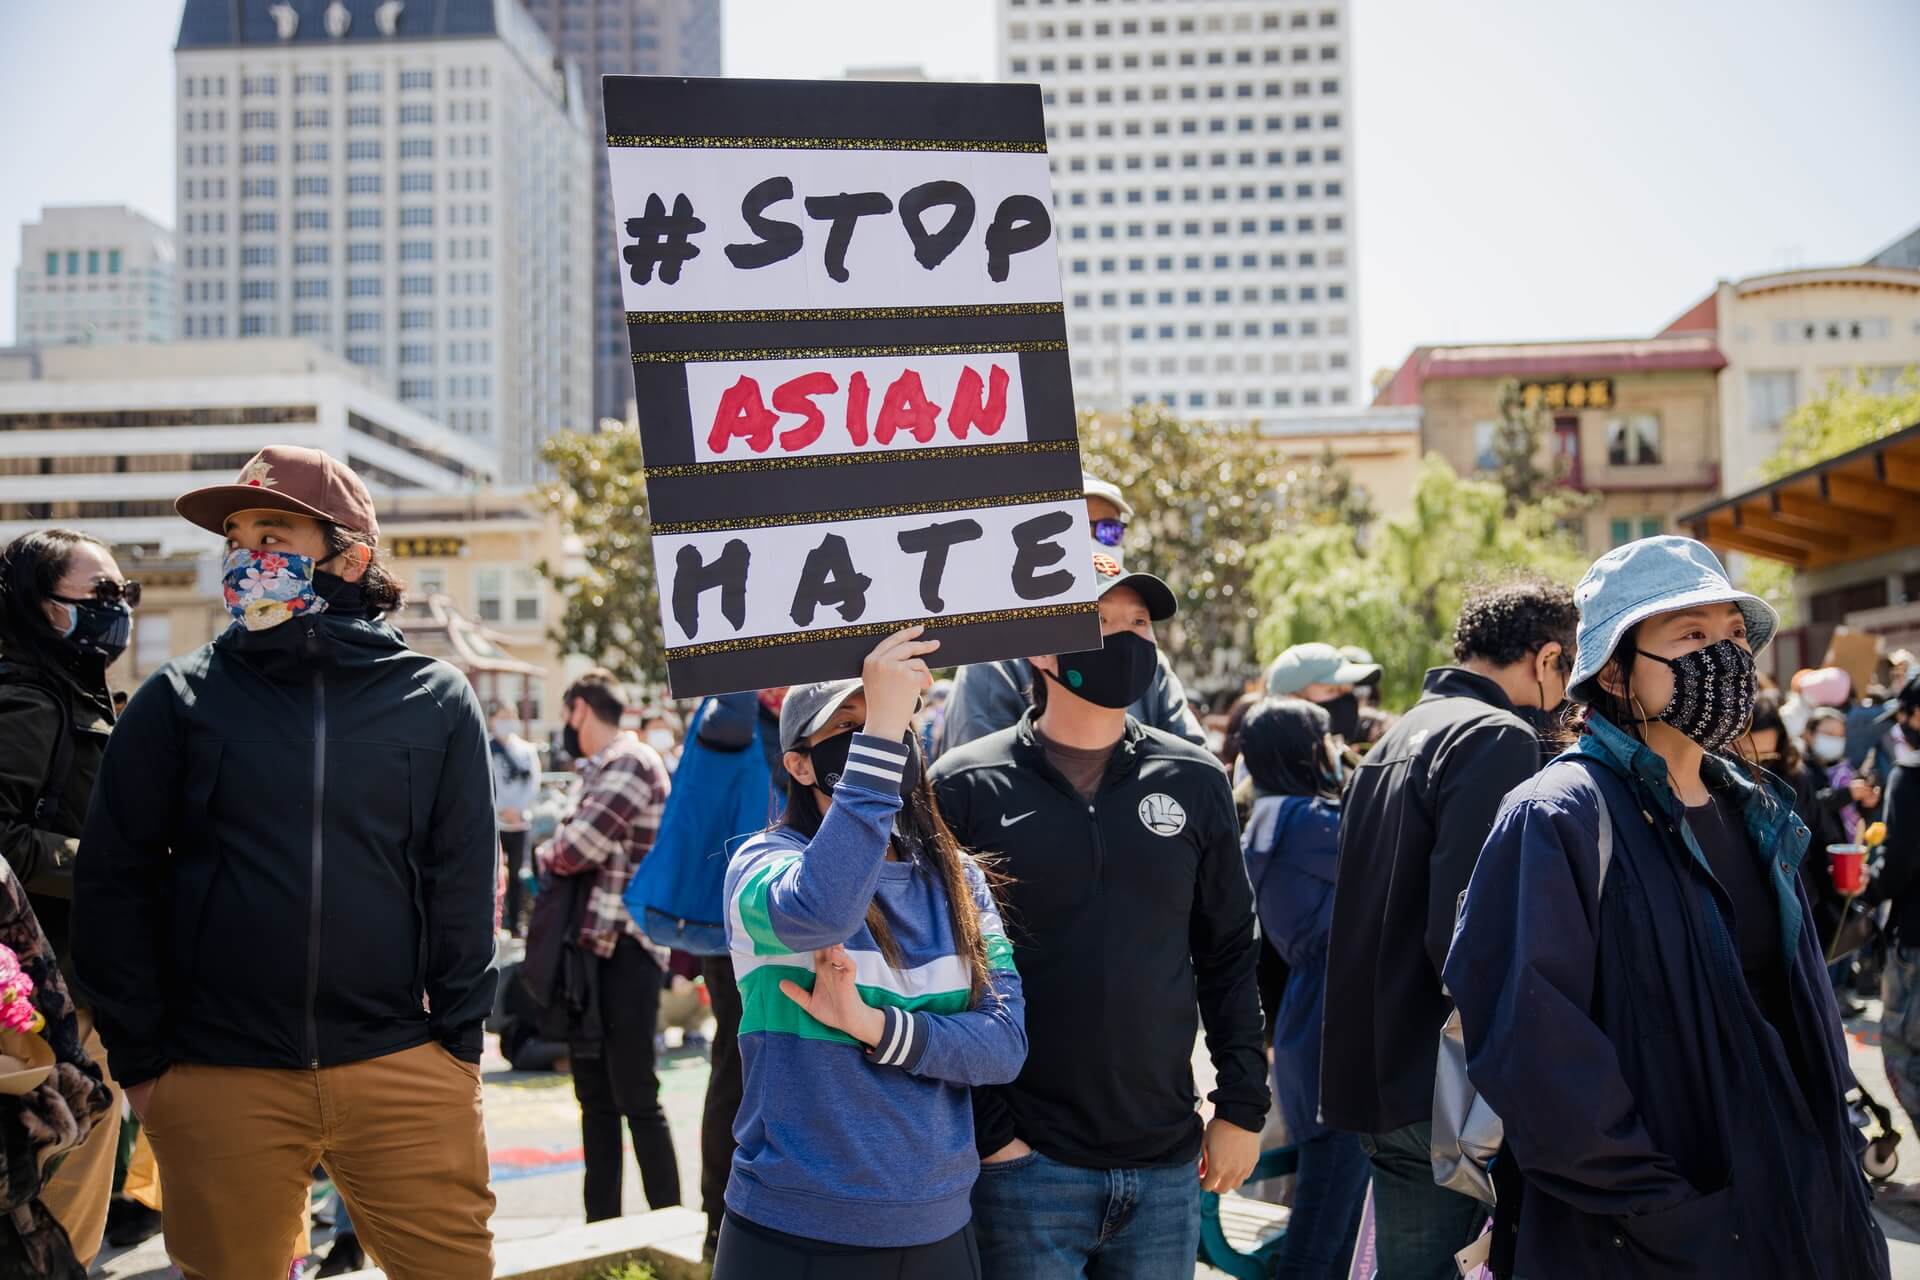 Stop Asian Hate protest sign in San Francisco, CA